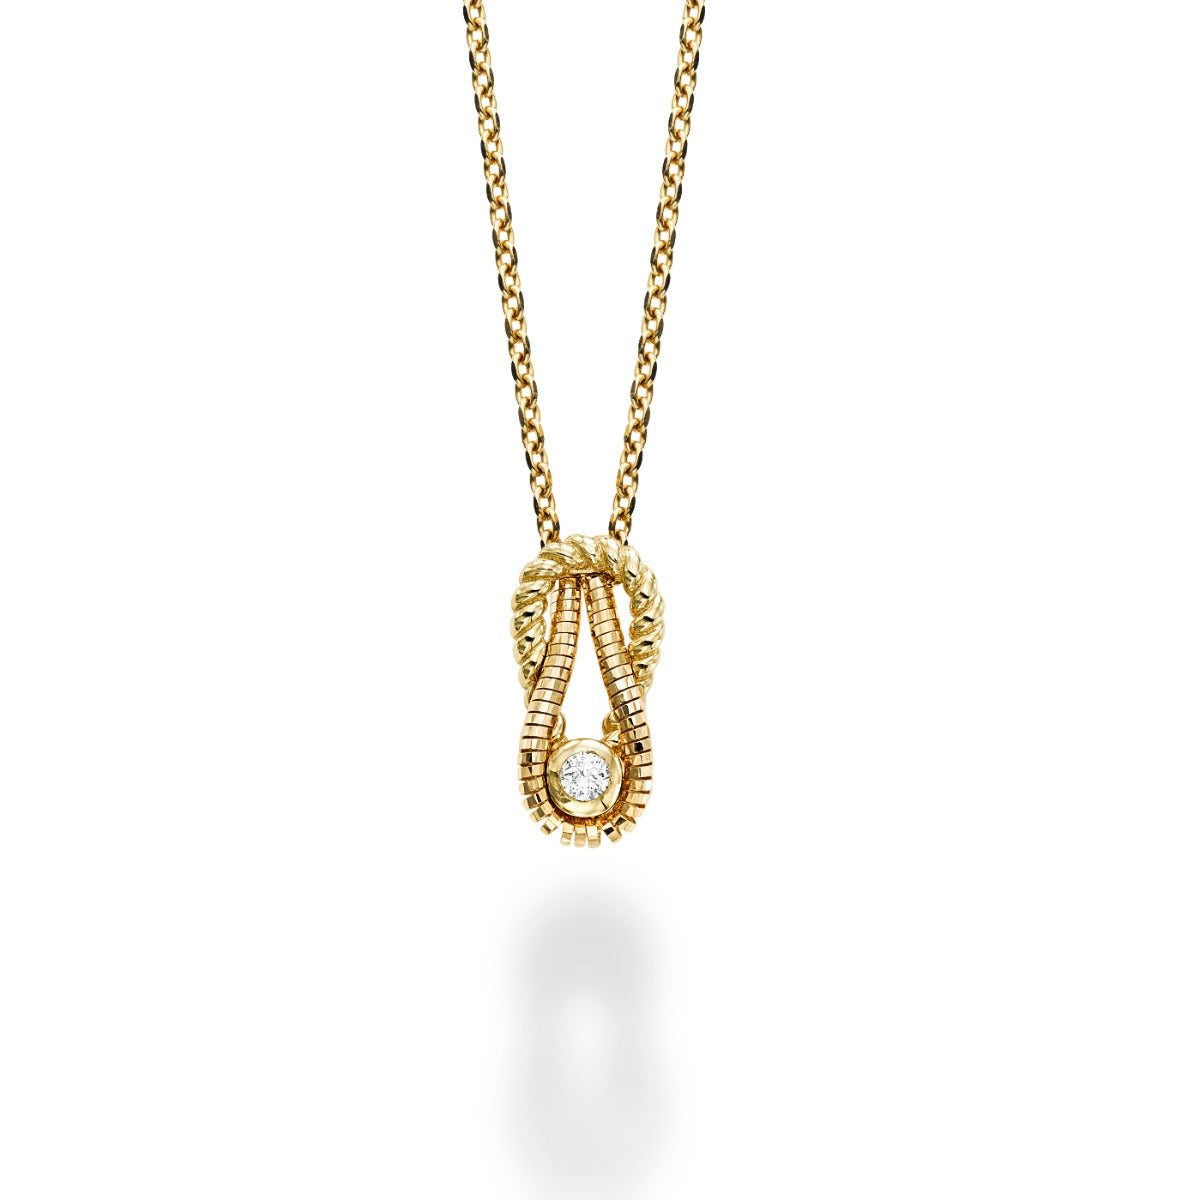 14K Gold with White Diamond Fancy Pendant Charm Necklace with Lobster Clasp